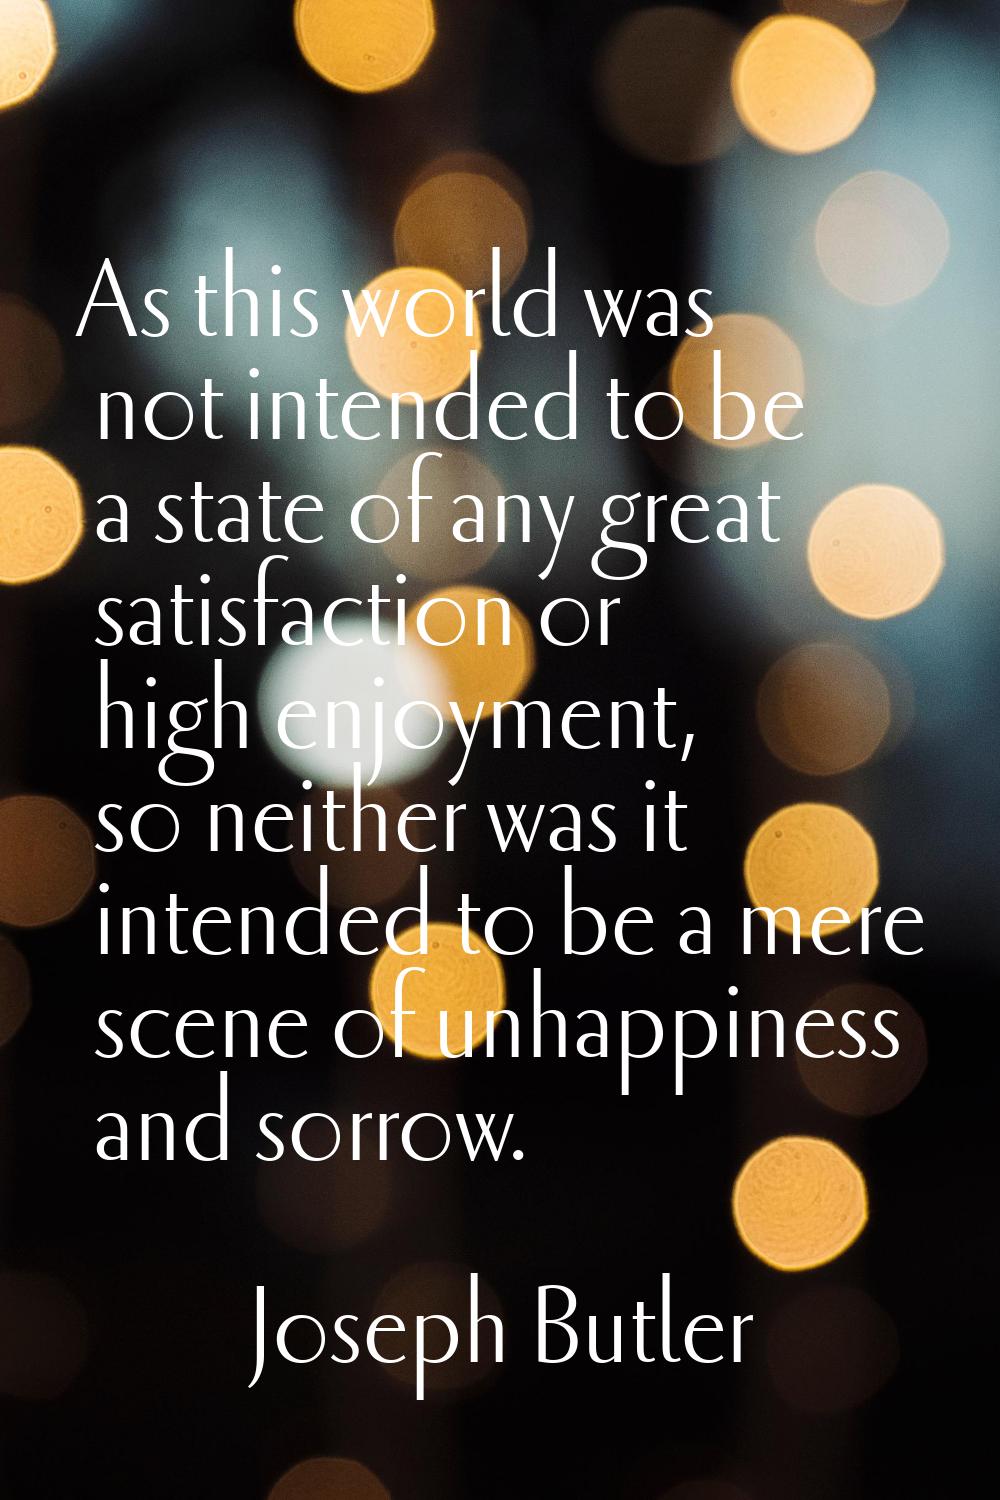 As this world was not intended to be a state of any great satisfaction or high enjoyment, so neithe